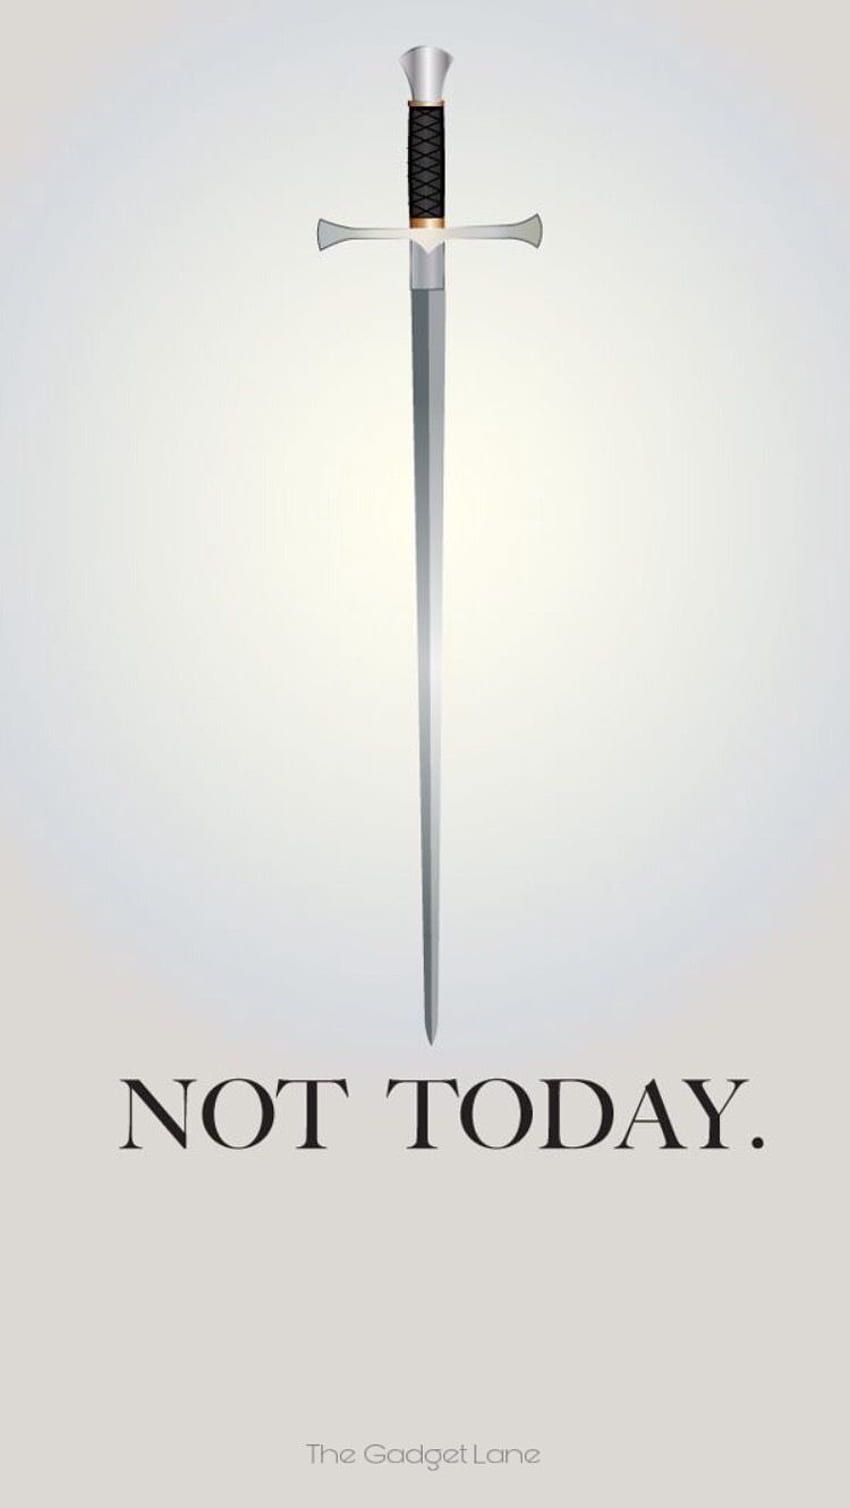 for iPhone X. Click the link below for Tech News N, Not Today Game of Thrones HD phone wallpaper